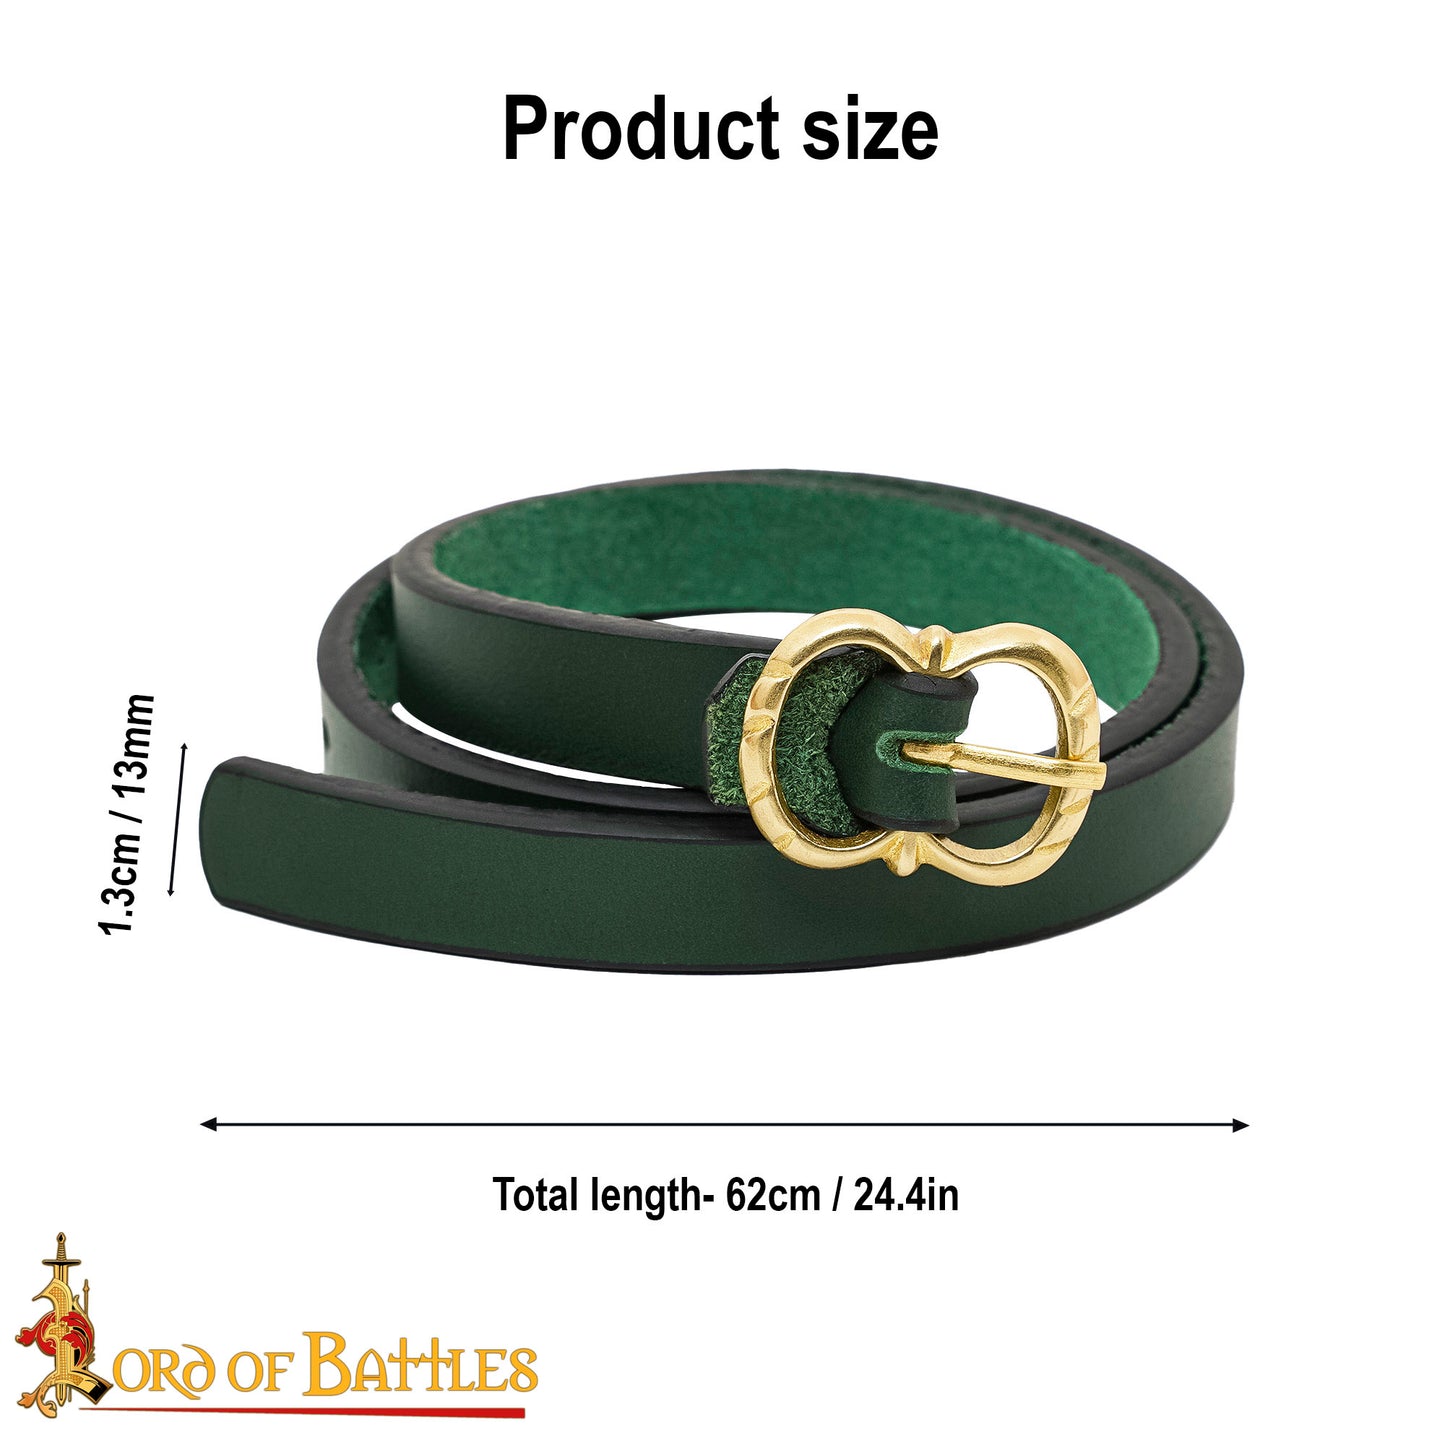 Green Leather Garters for Medieval Stockings